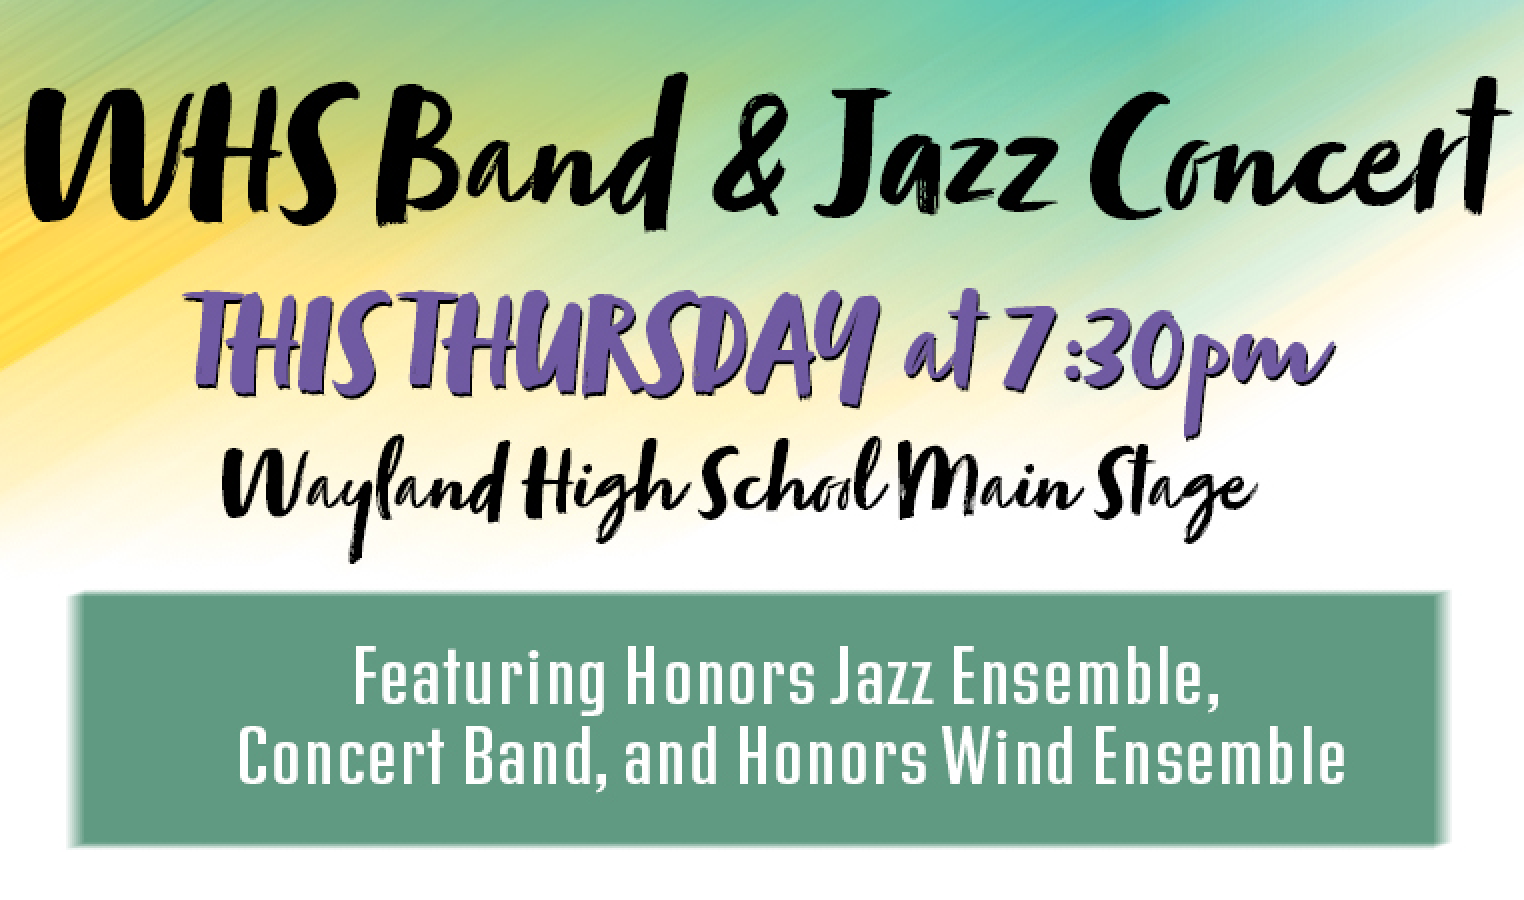 WHS Band and Jazz Concert – Thursday, November 30th